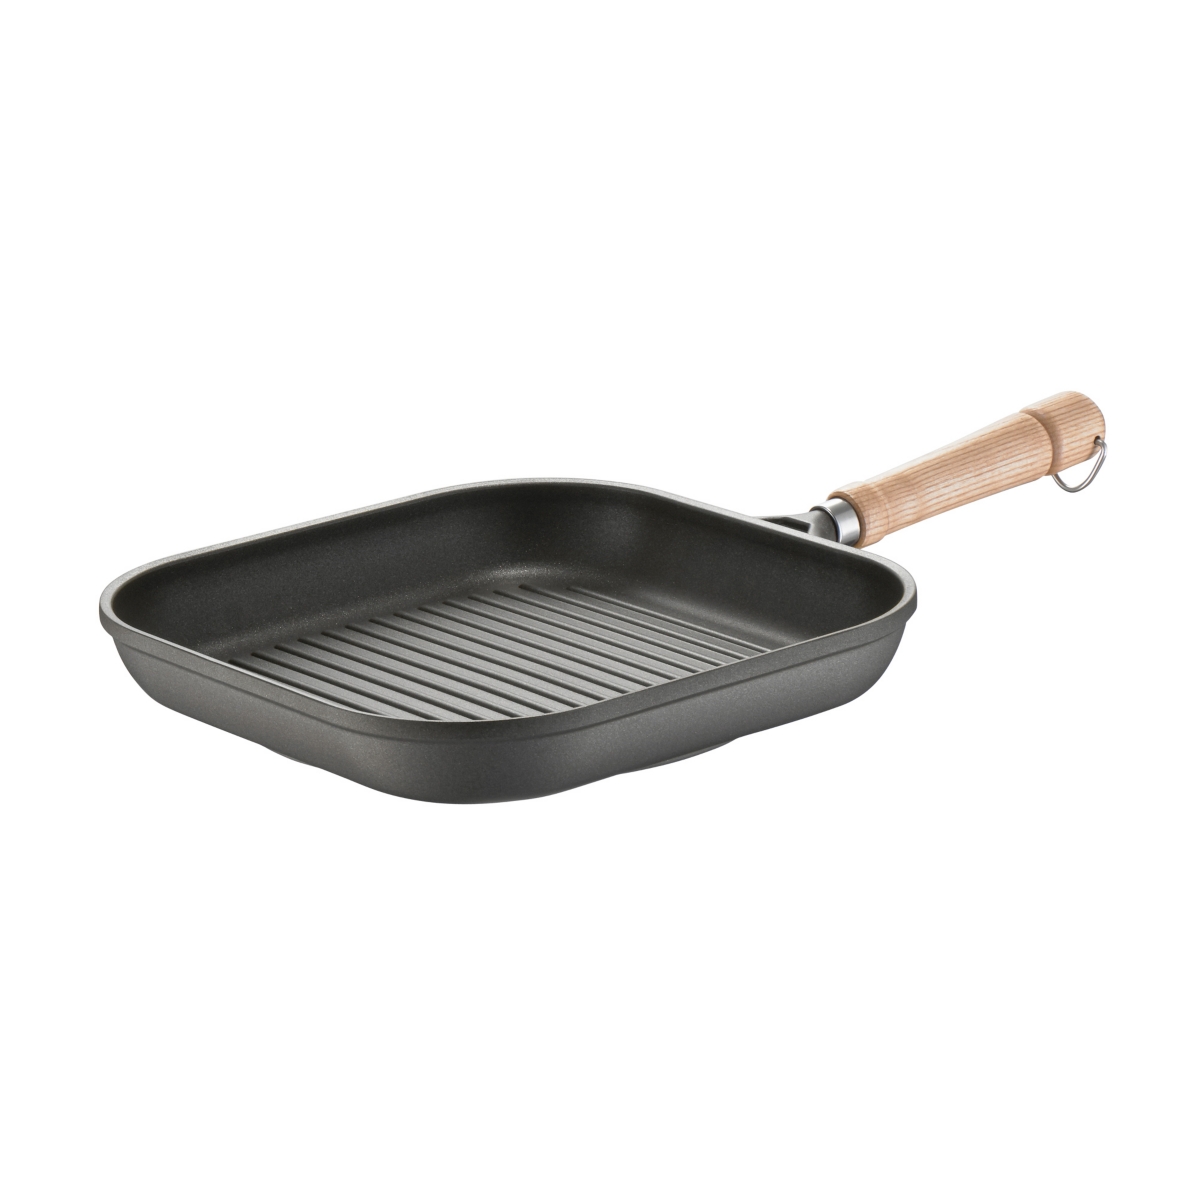 Berndes Tradition Induction 11.5" Square Grill Pan